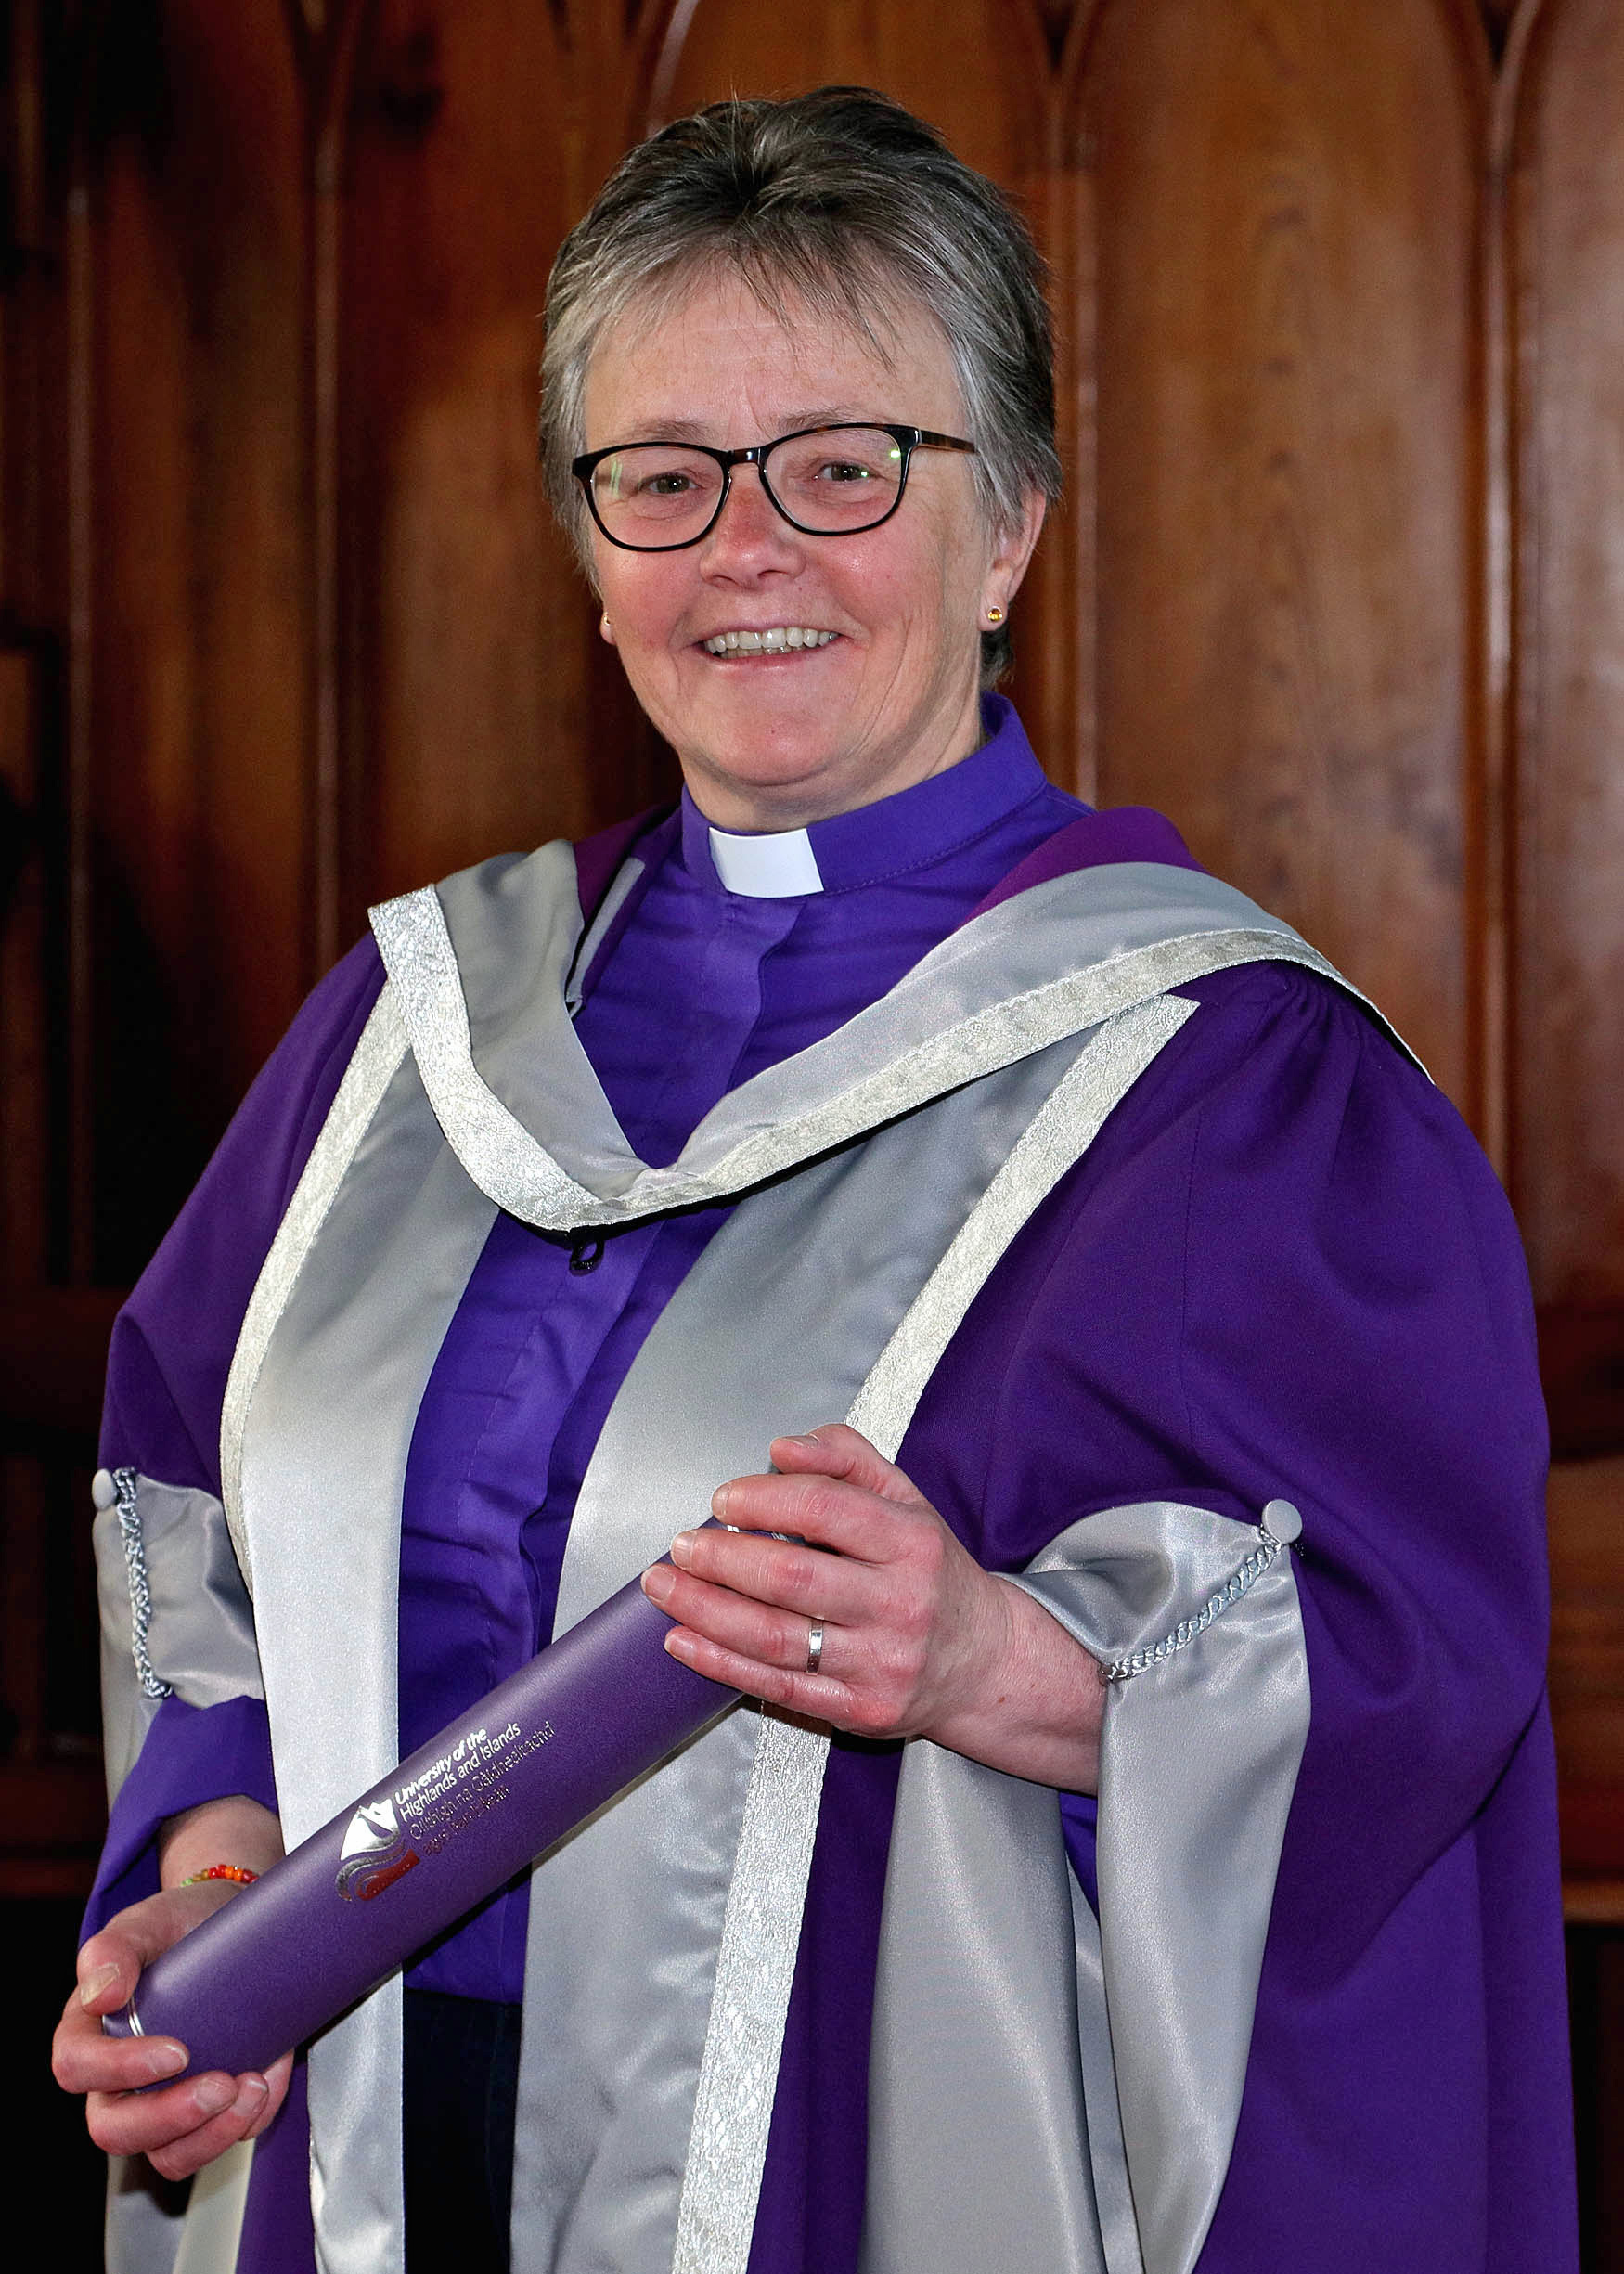 Highland minister awarded honorary doctorate